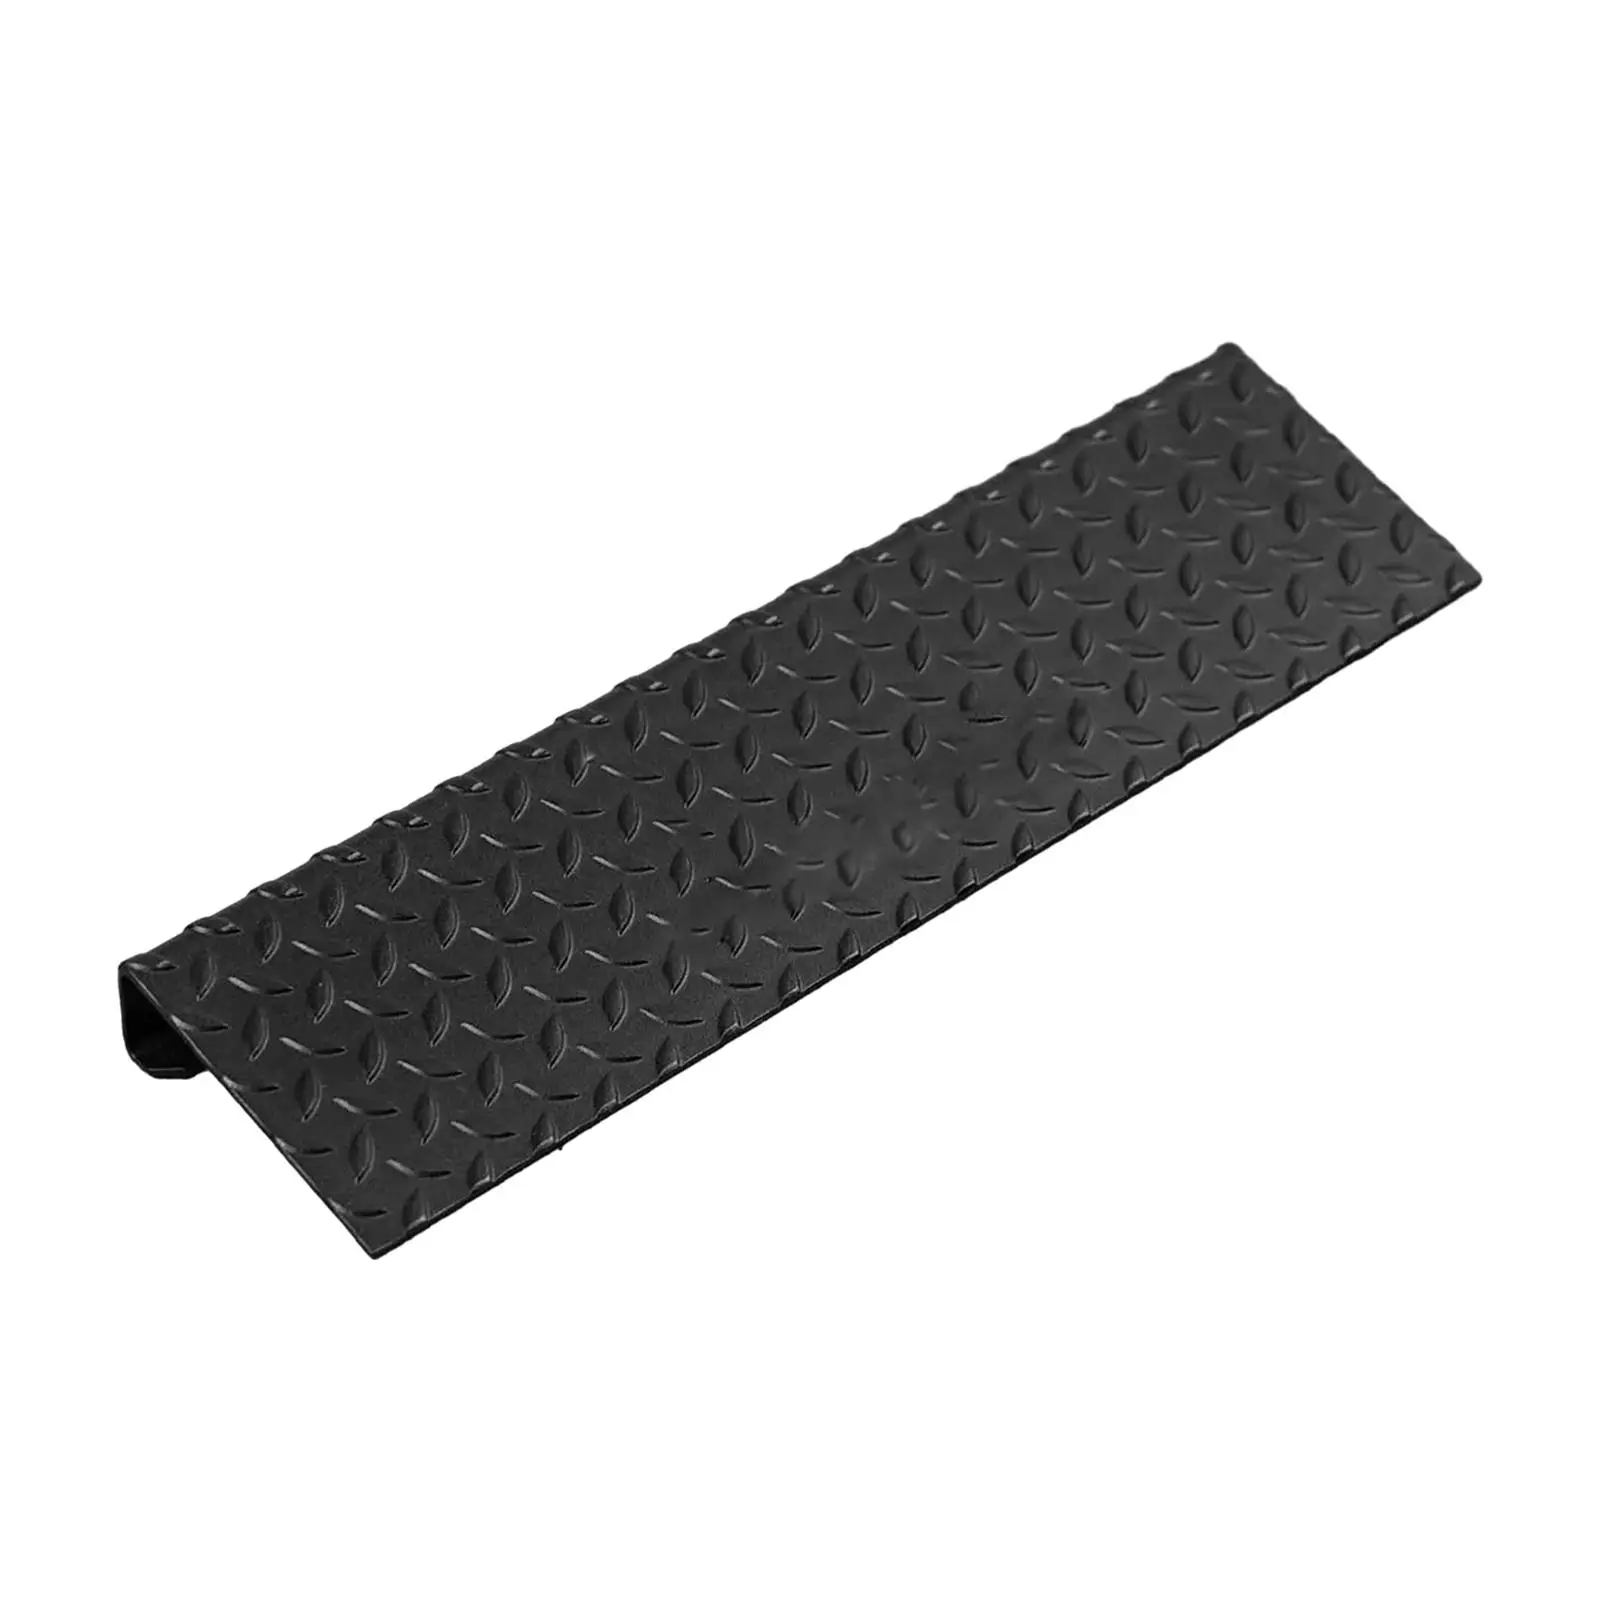 Slant Board Calf Stretcher Exercise Non Slip for Stretching Tight Calves Yoga Board Ankle and Foot Incline Board Muscle Building